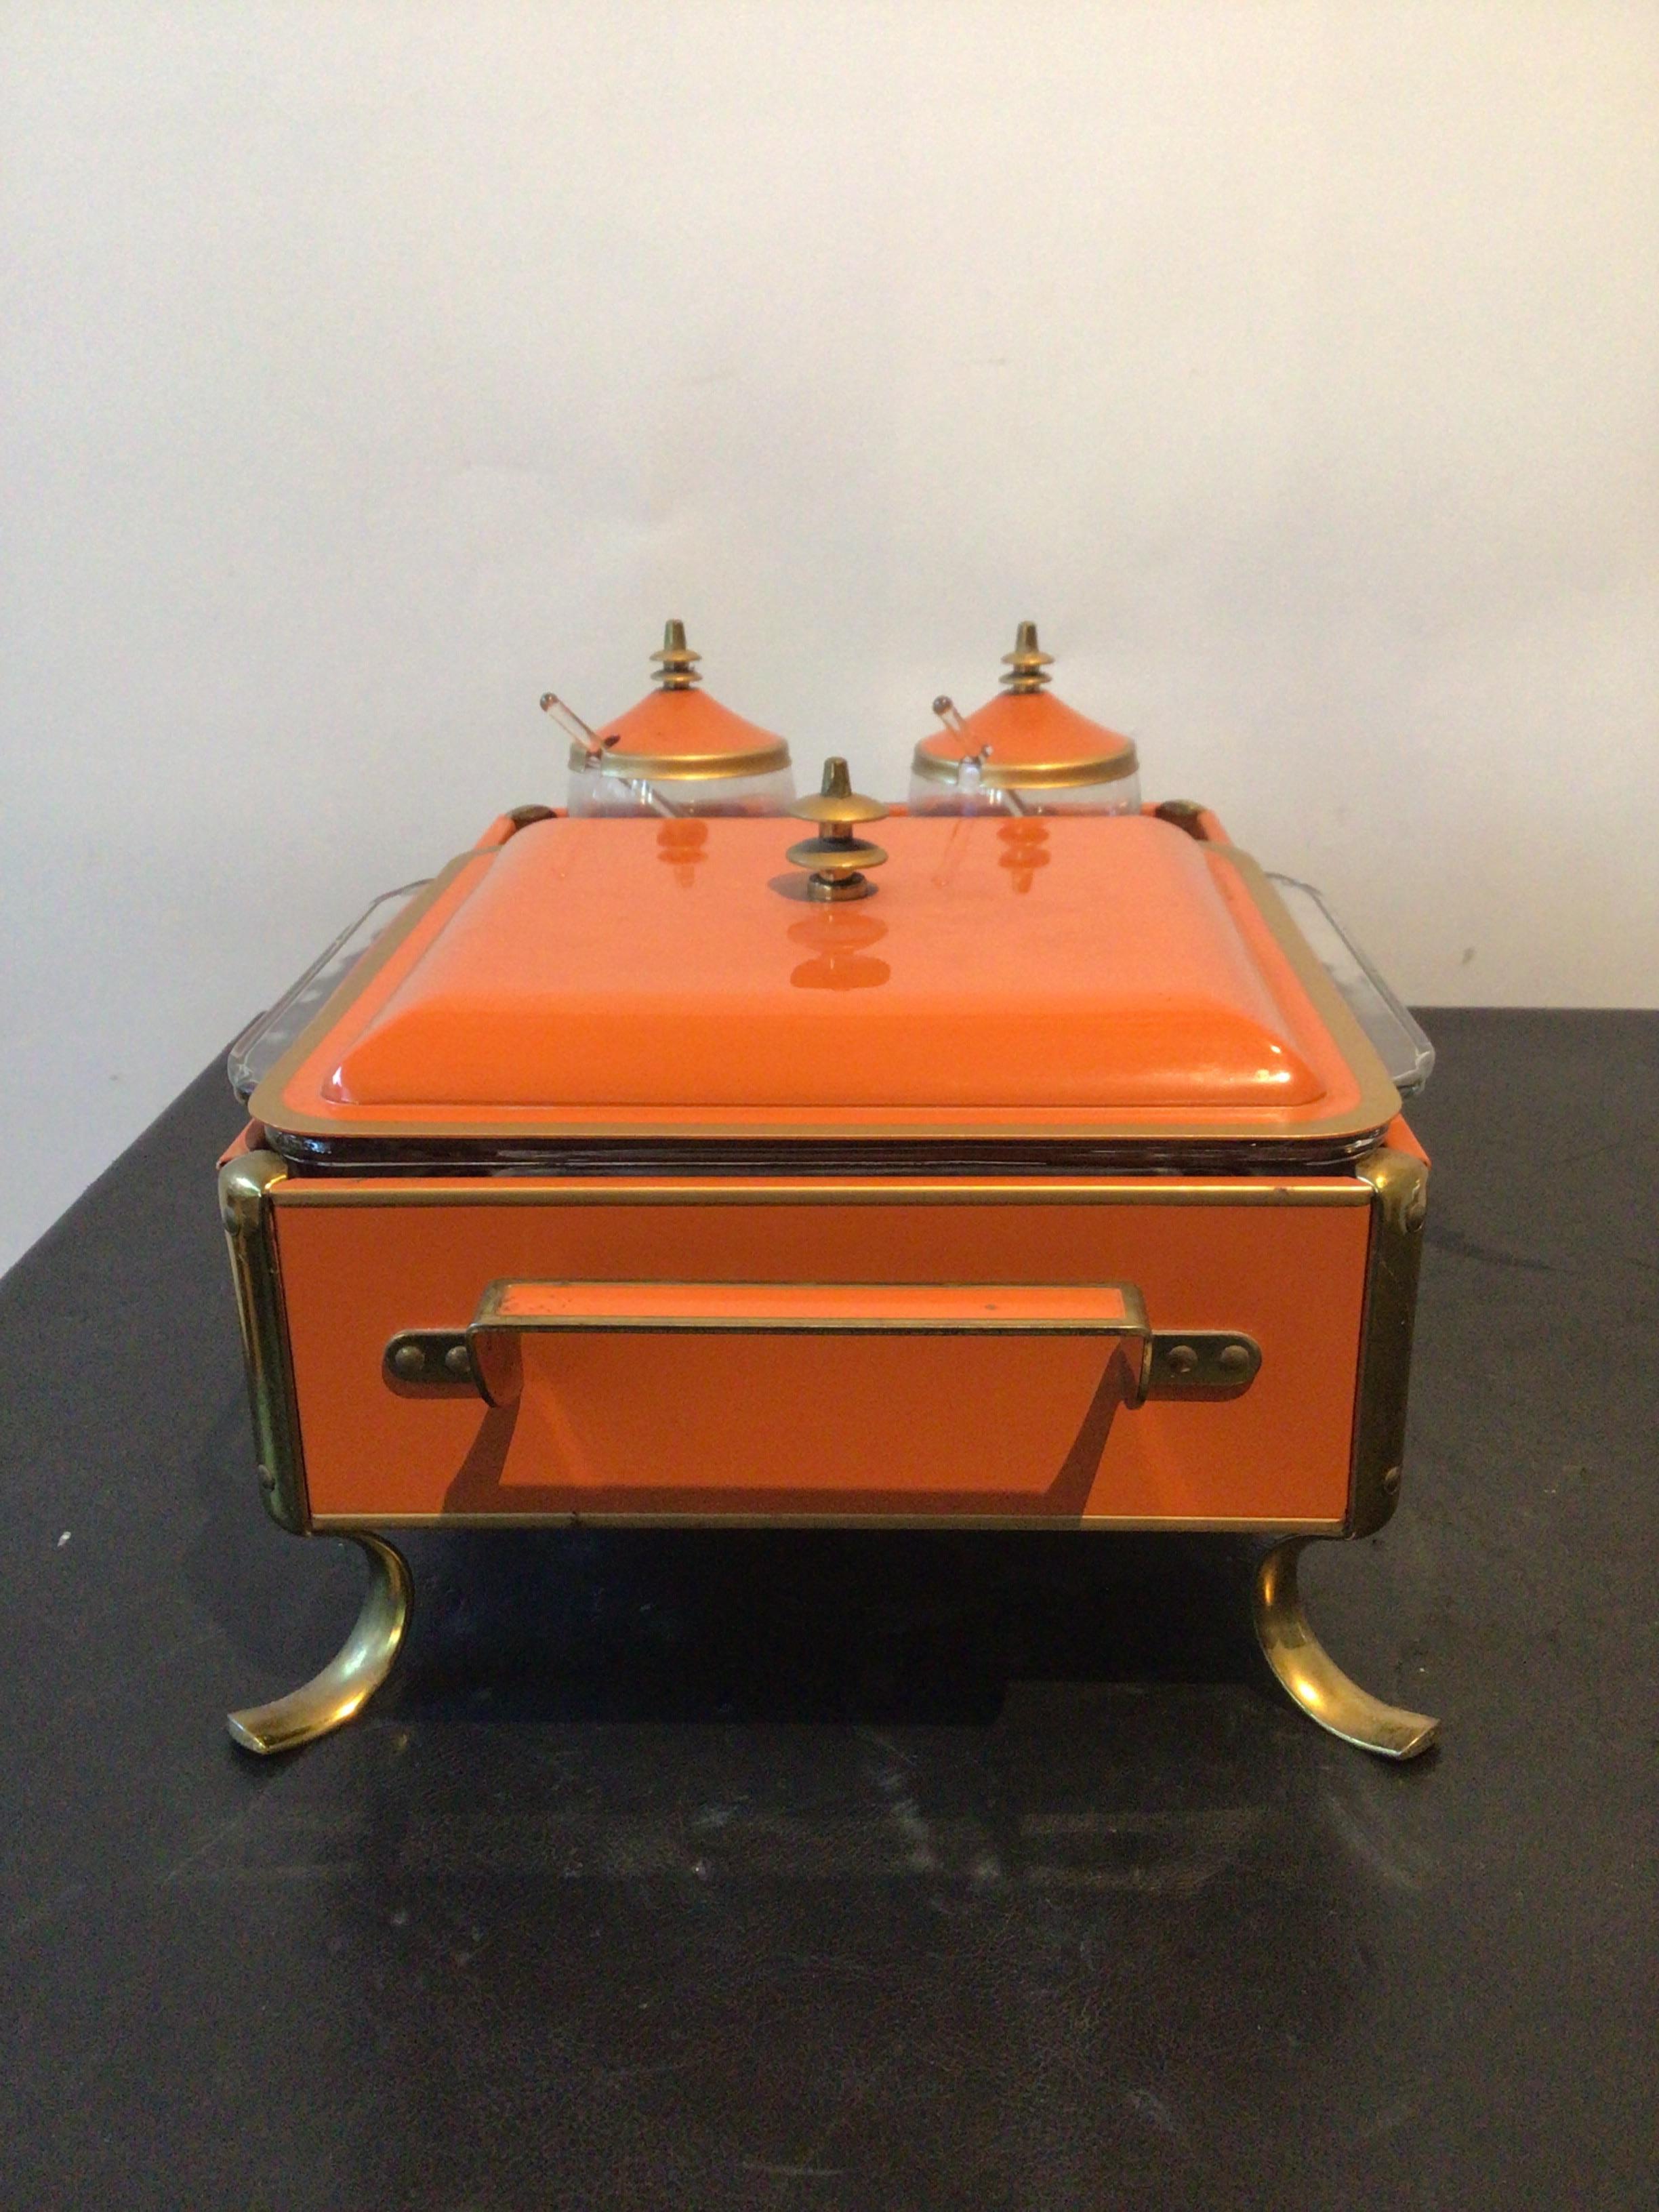 Orange Enamel Fire King Serving Dish In Good Condition For Sale In Tarrytown, NY